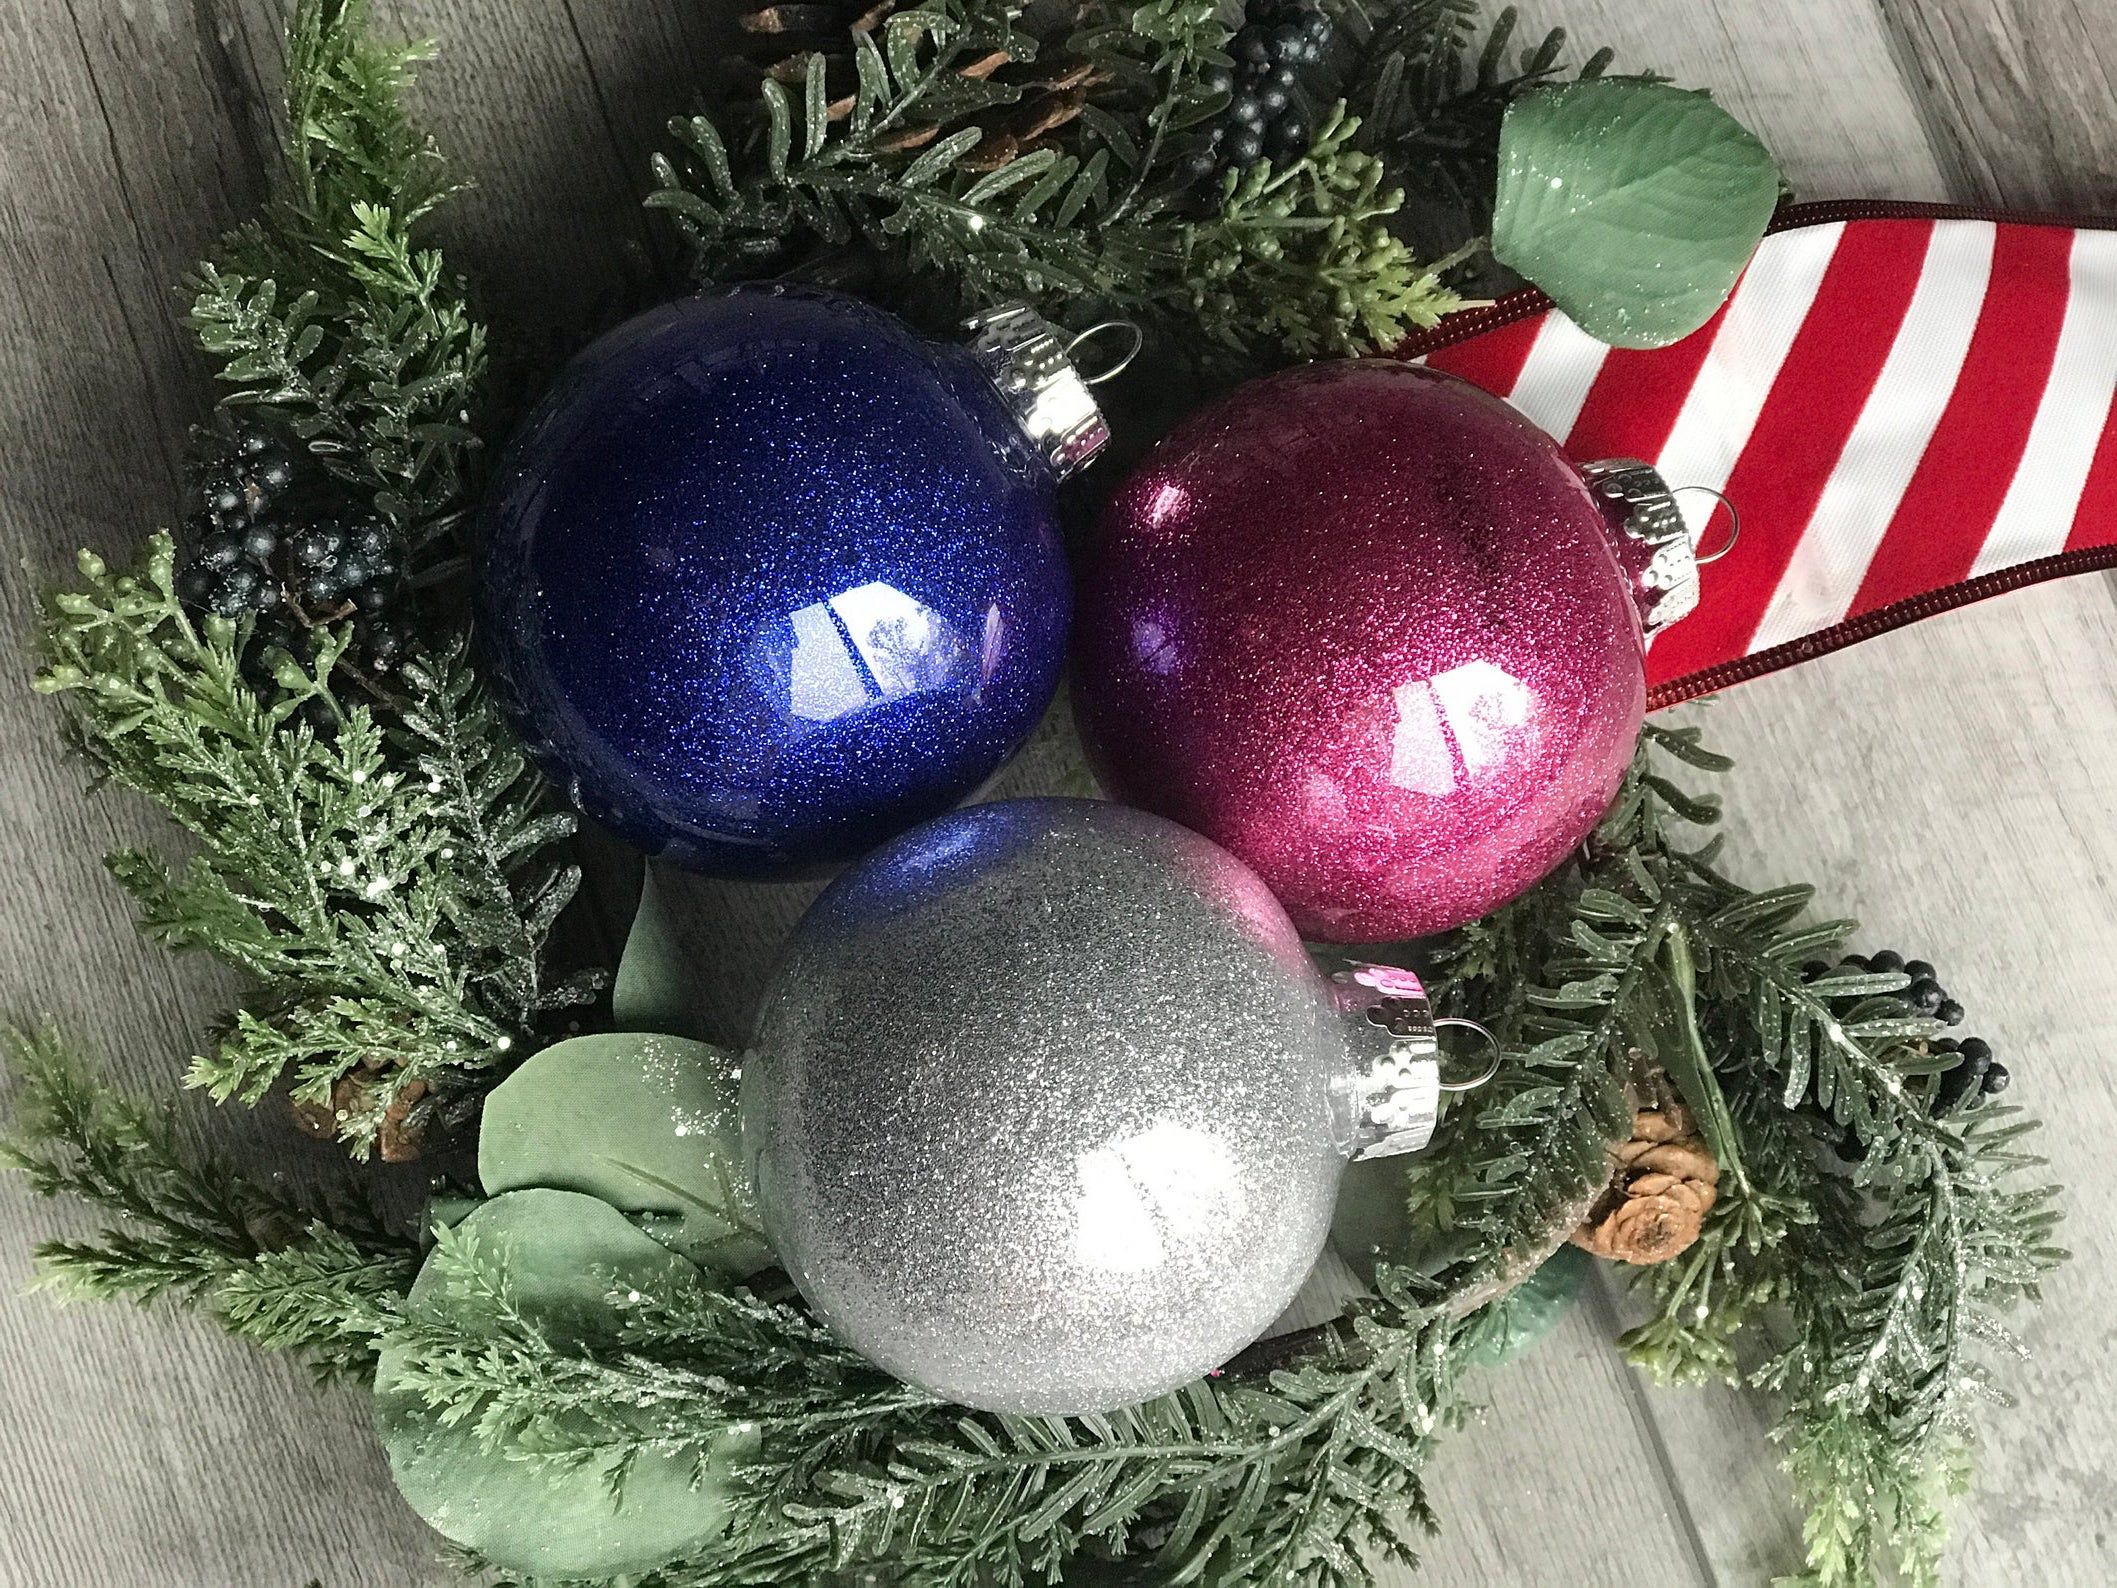 Details about   30X Glitter Christmas Balls Baubles Xmas Tree Ornaments Christmas Home Decor DIY 